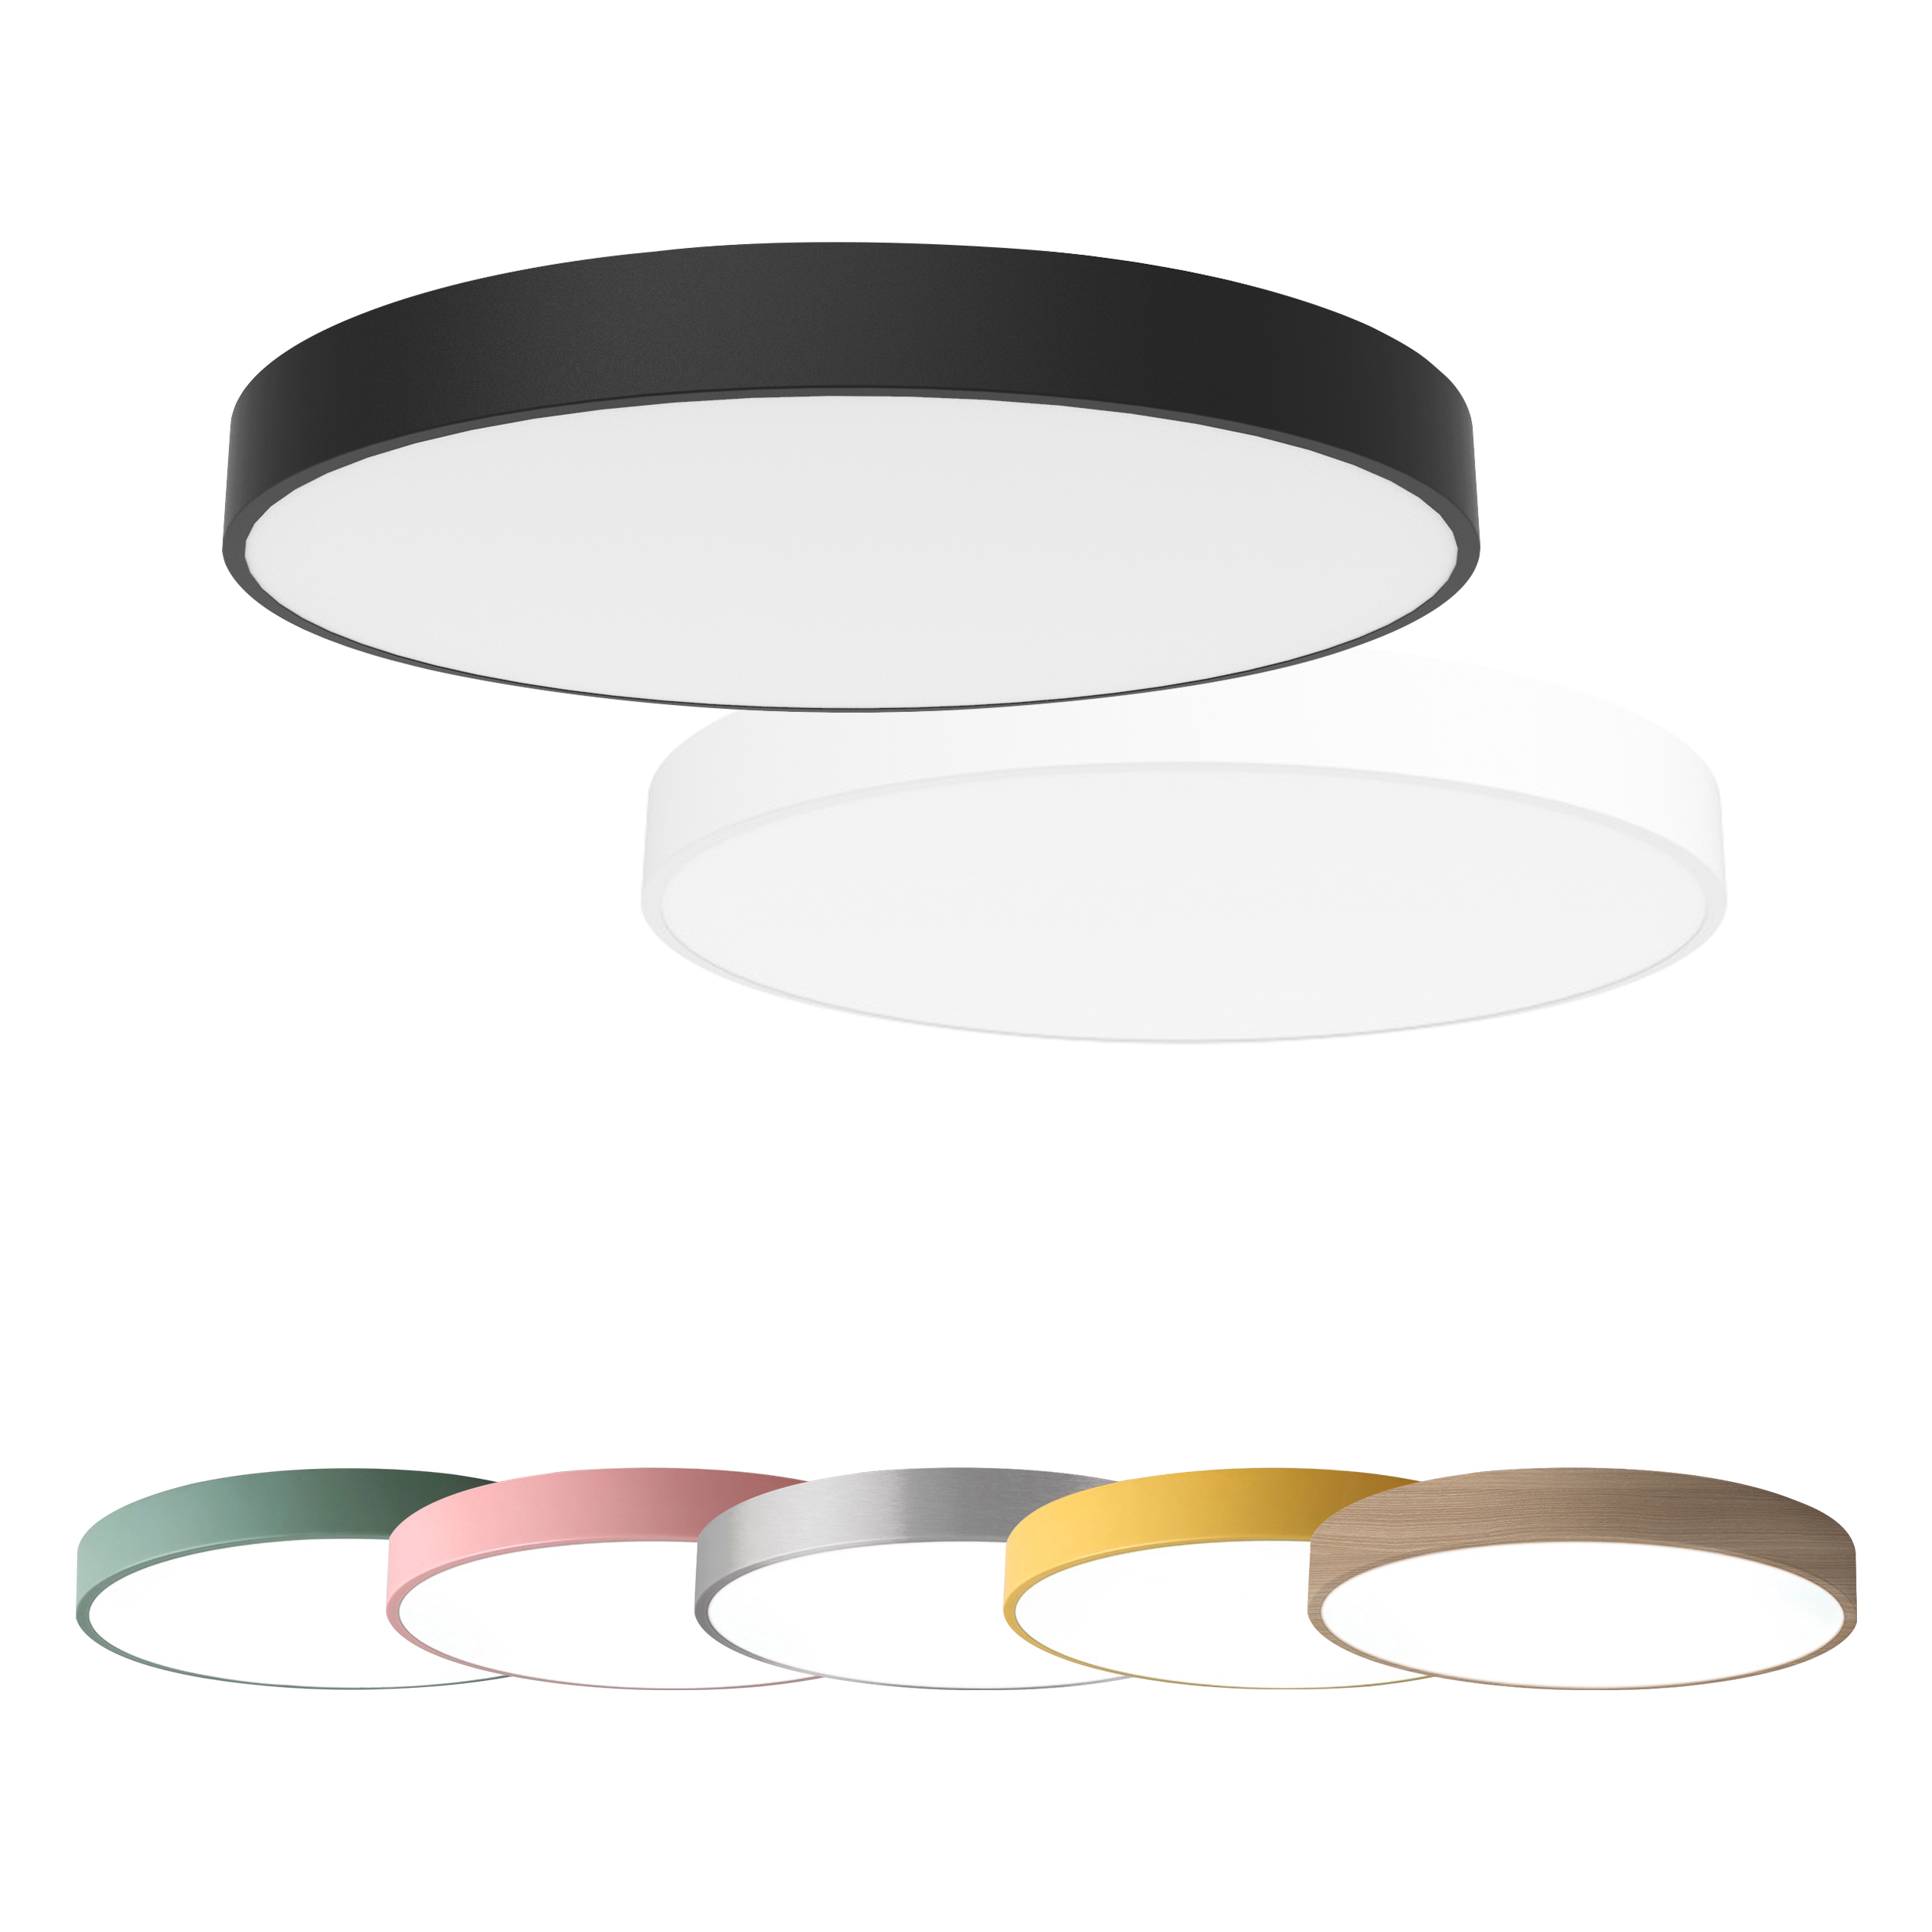 Dimmable ceiling lights - CL1801-AC